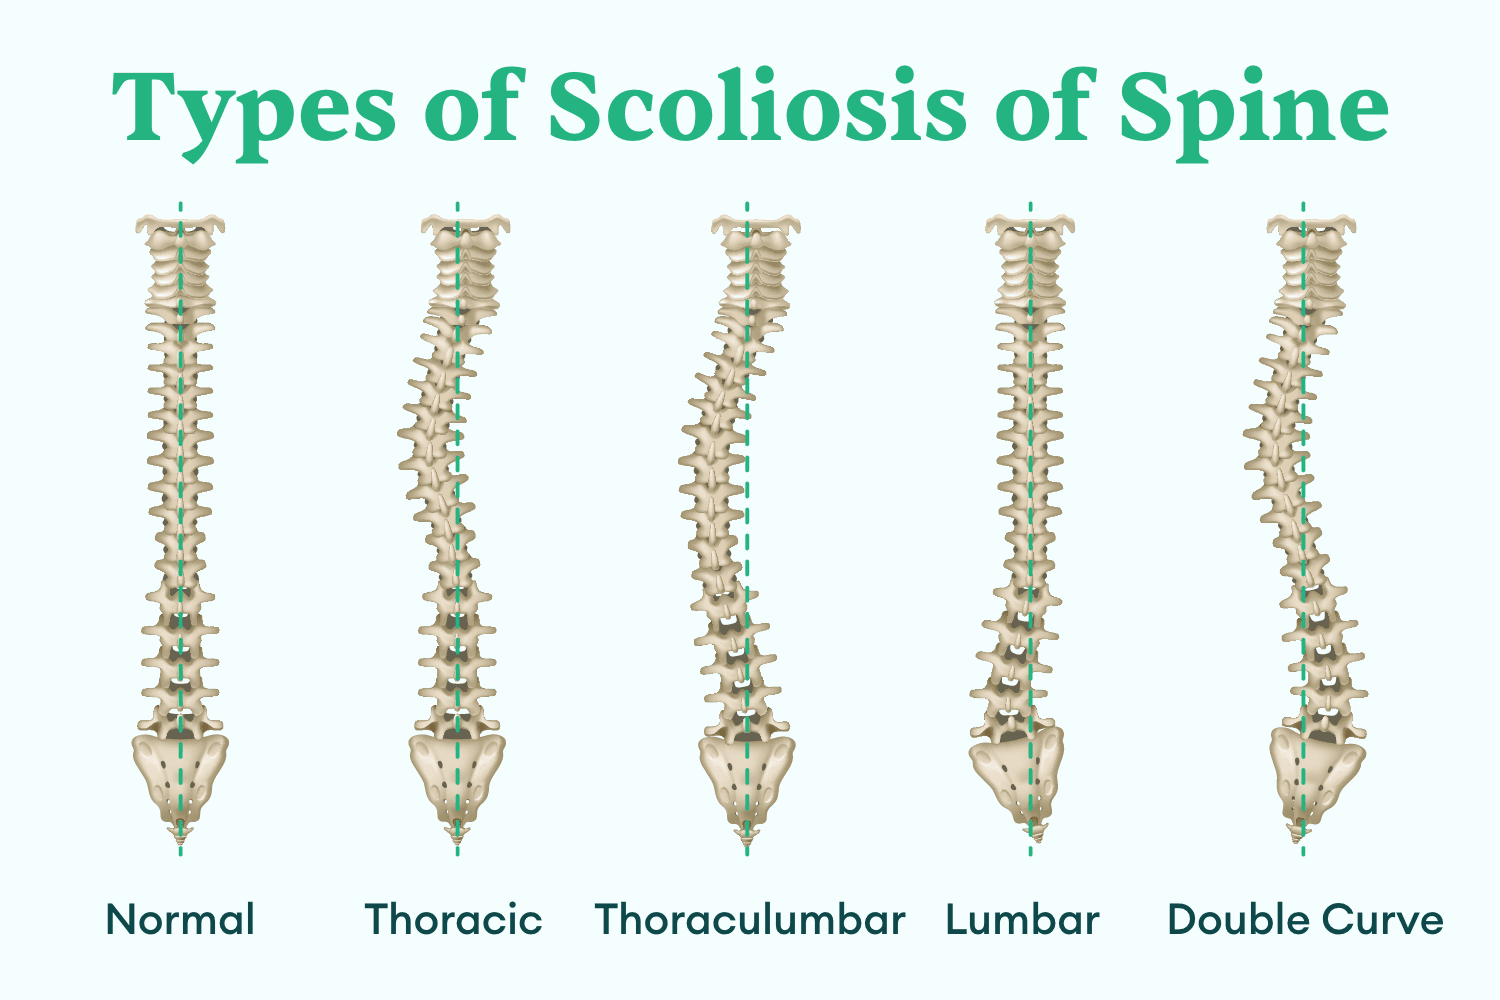 Illustration showing the different types of scoliosis of spine